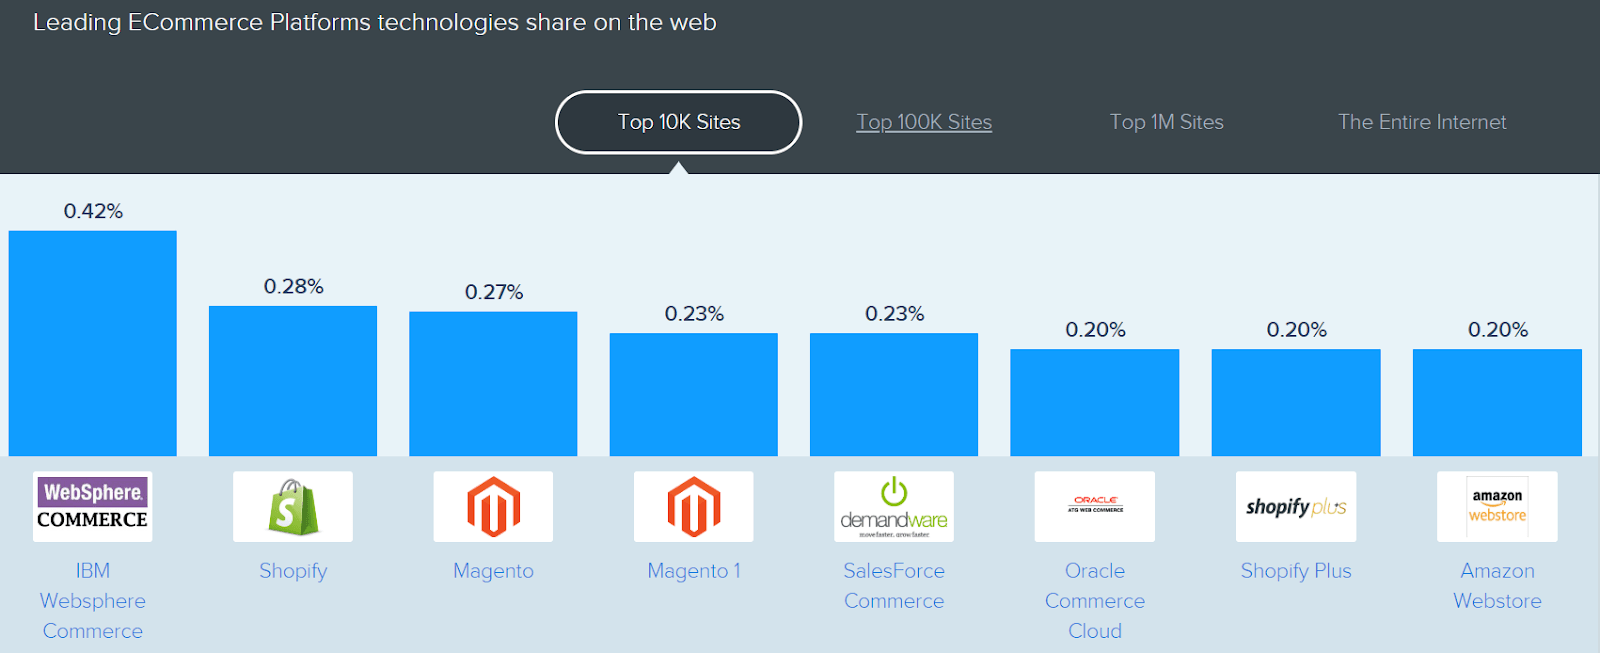 Walmart, Staples, Adidas, and Kroger are among key clients of Magento.